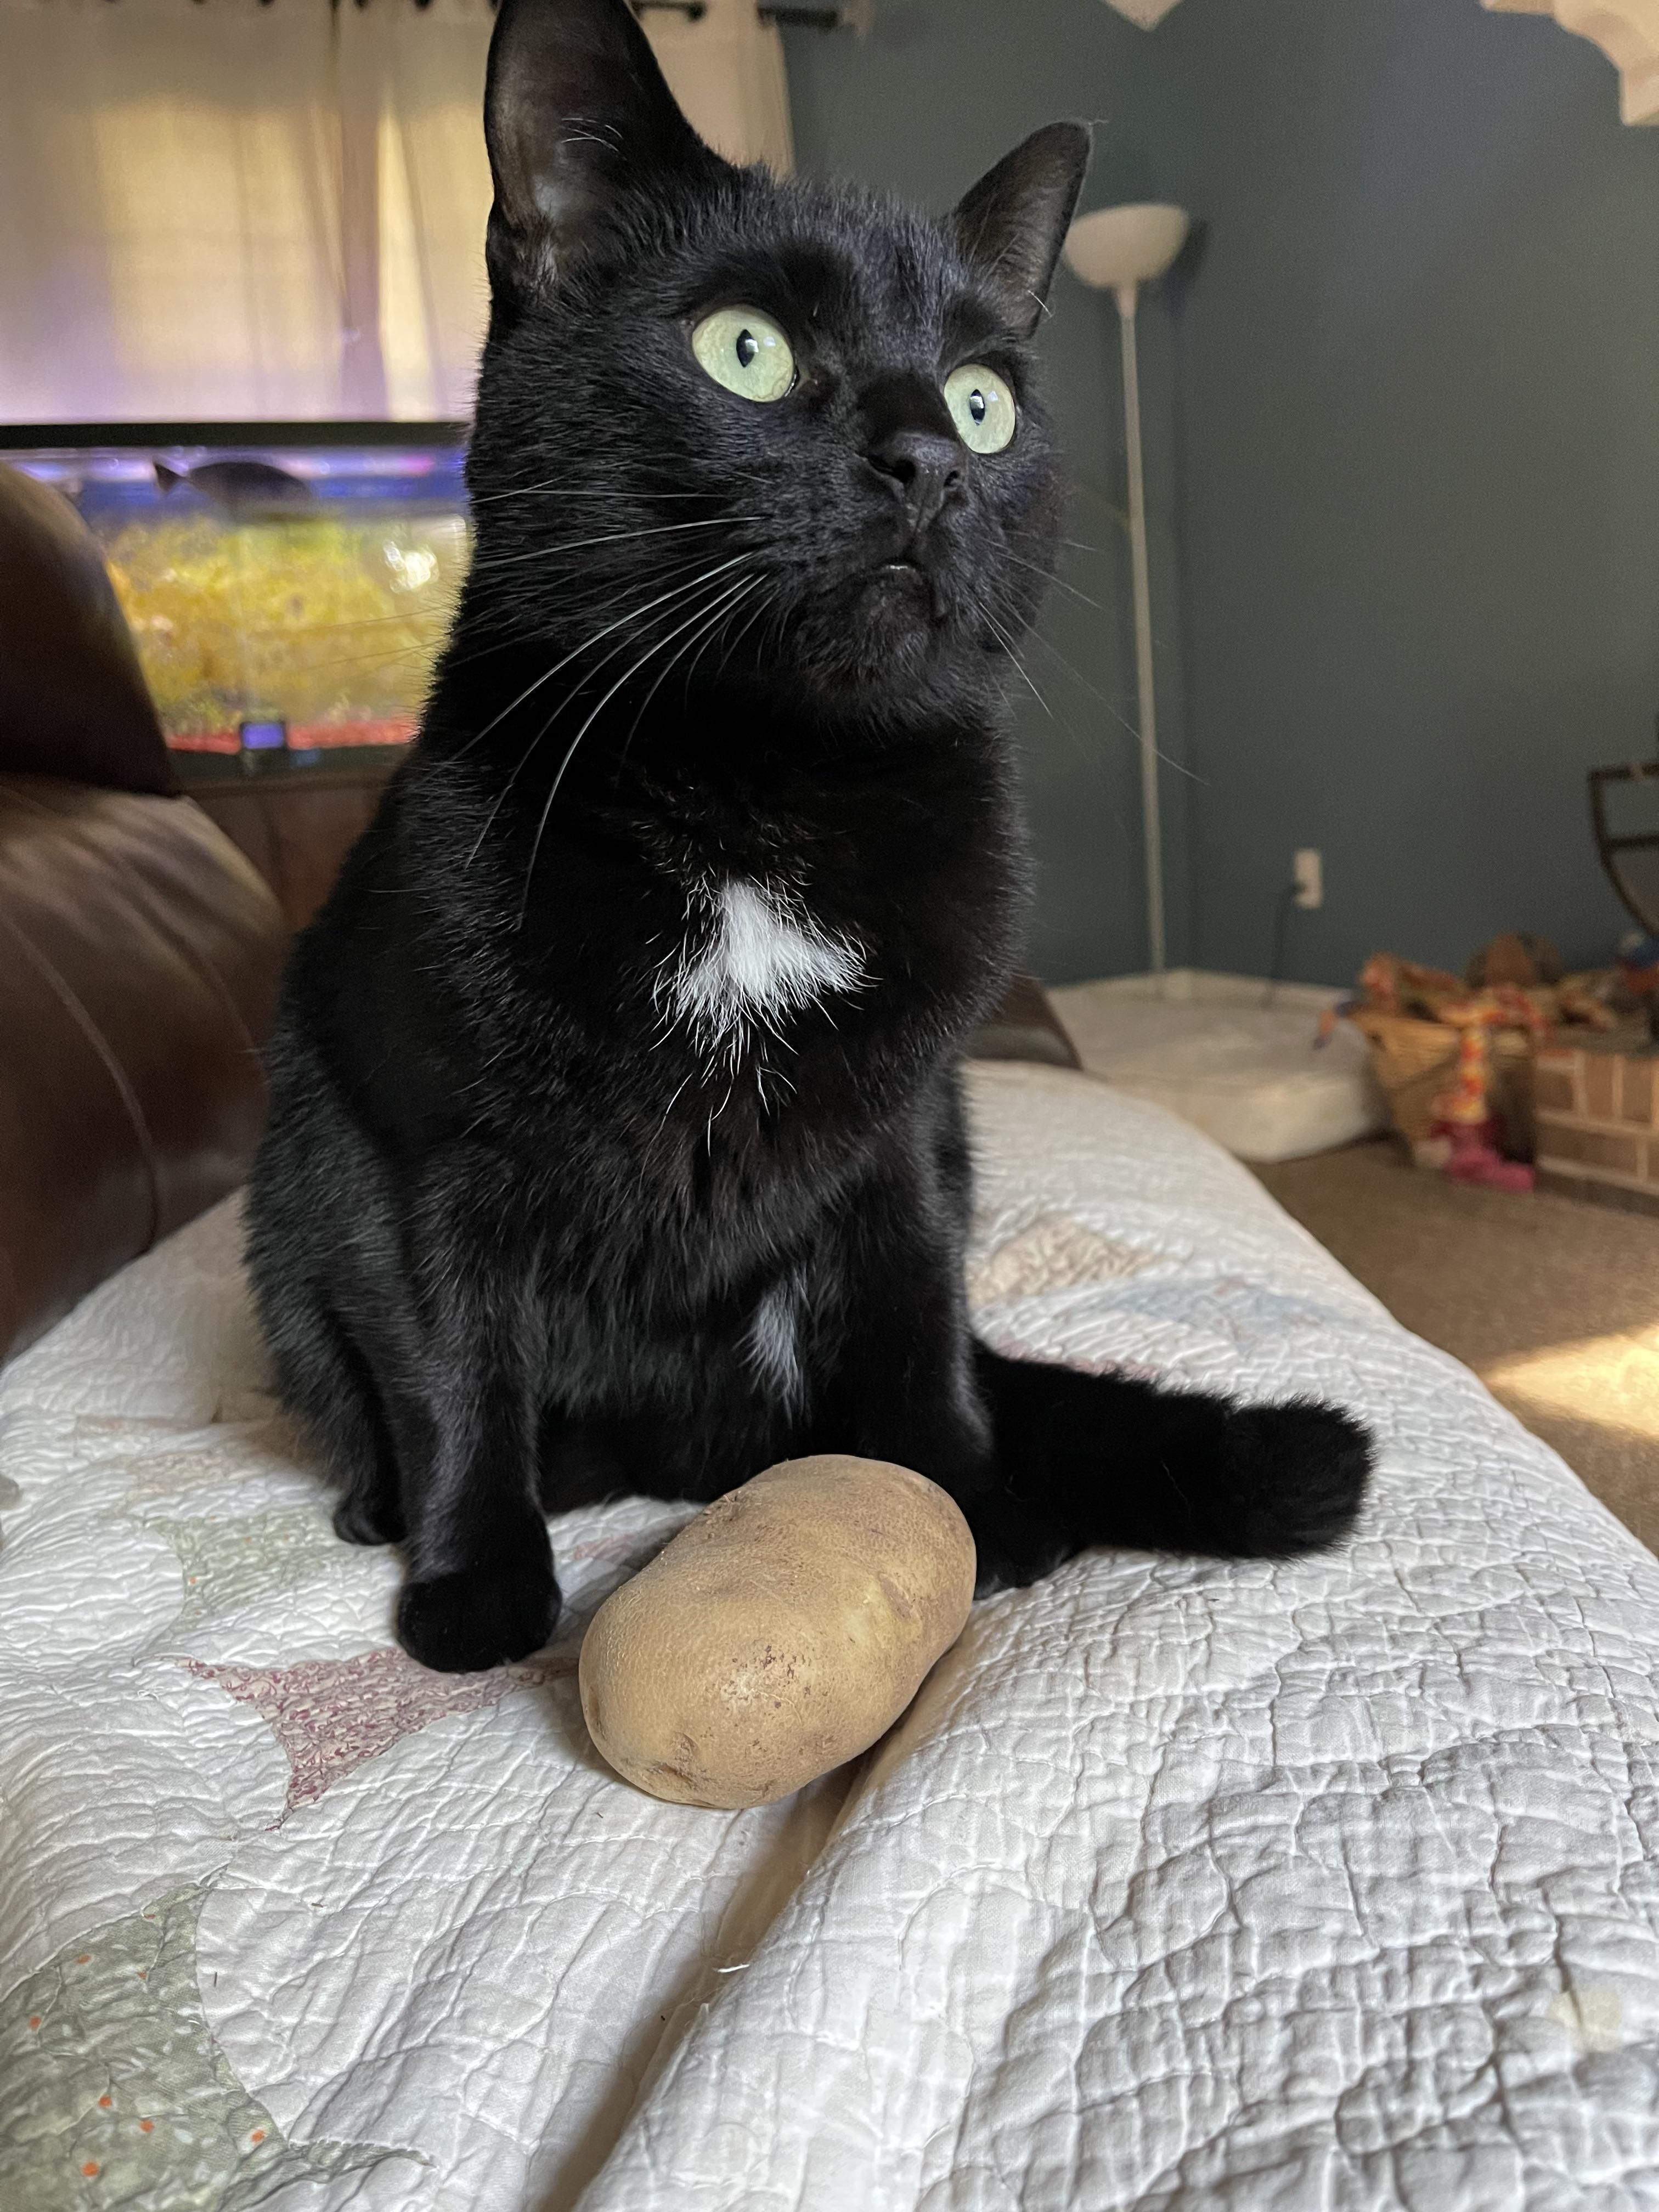 My cat brought me a potato. That’s so nice, not only did he bring me food he brought my cultures most revered food item: the potato. I can eat it today or drink it next week!